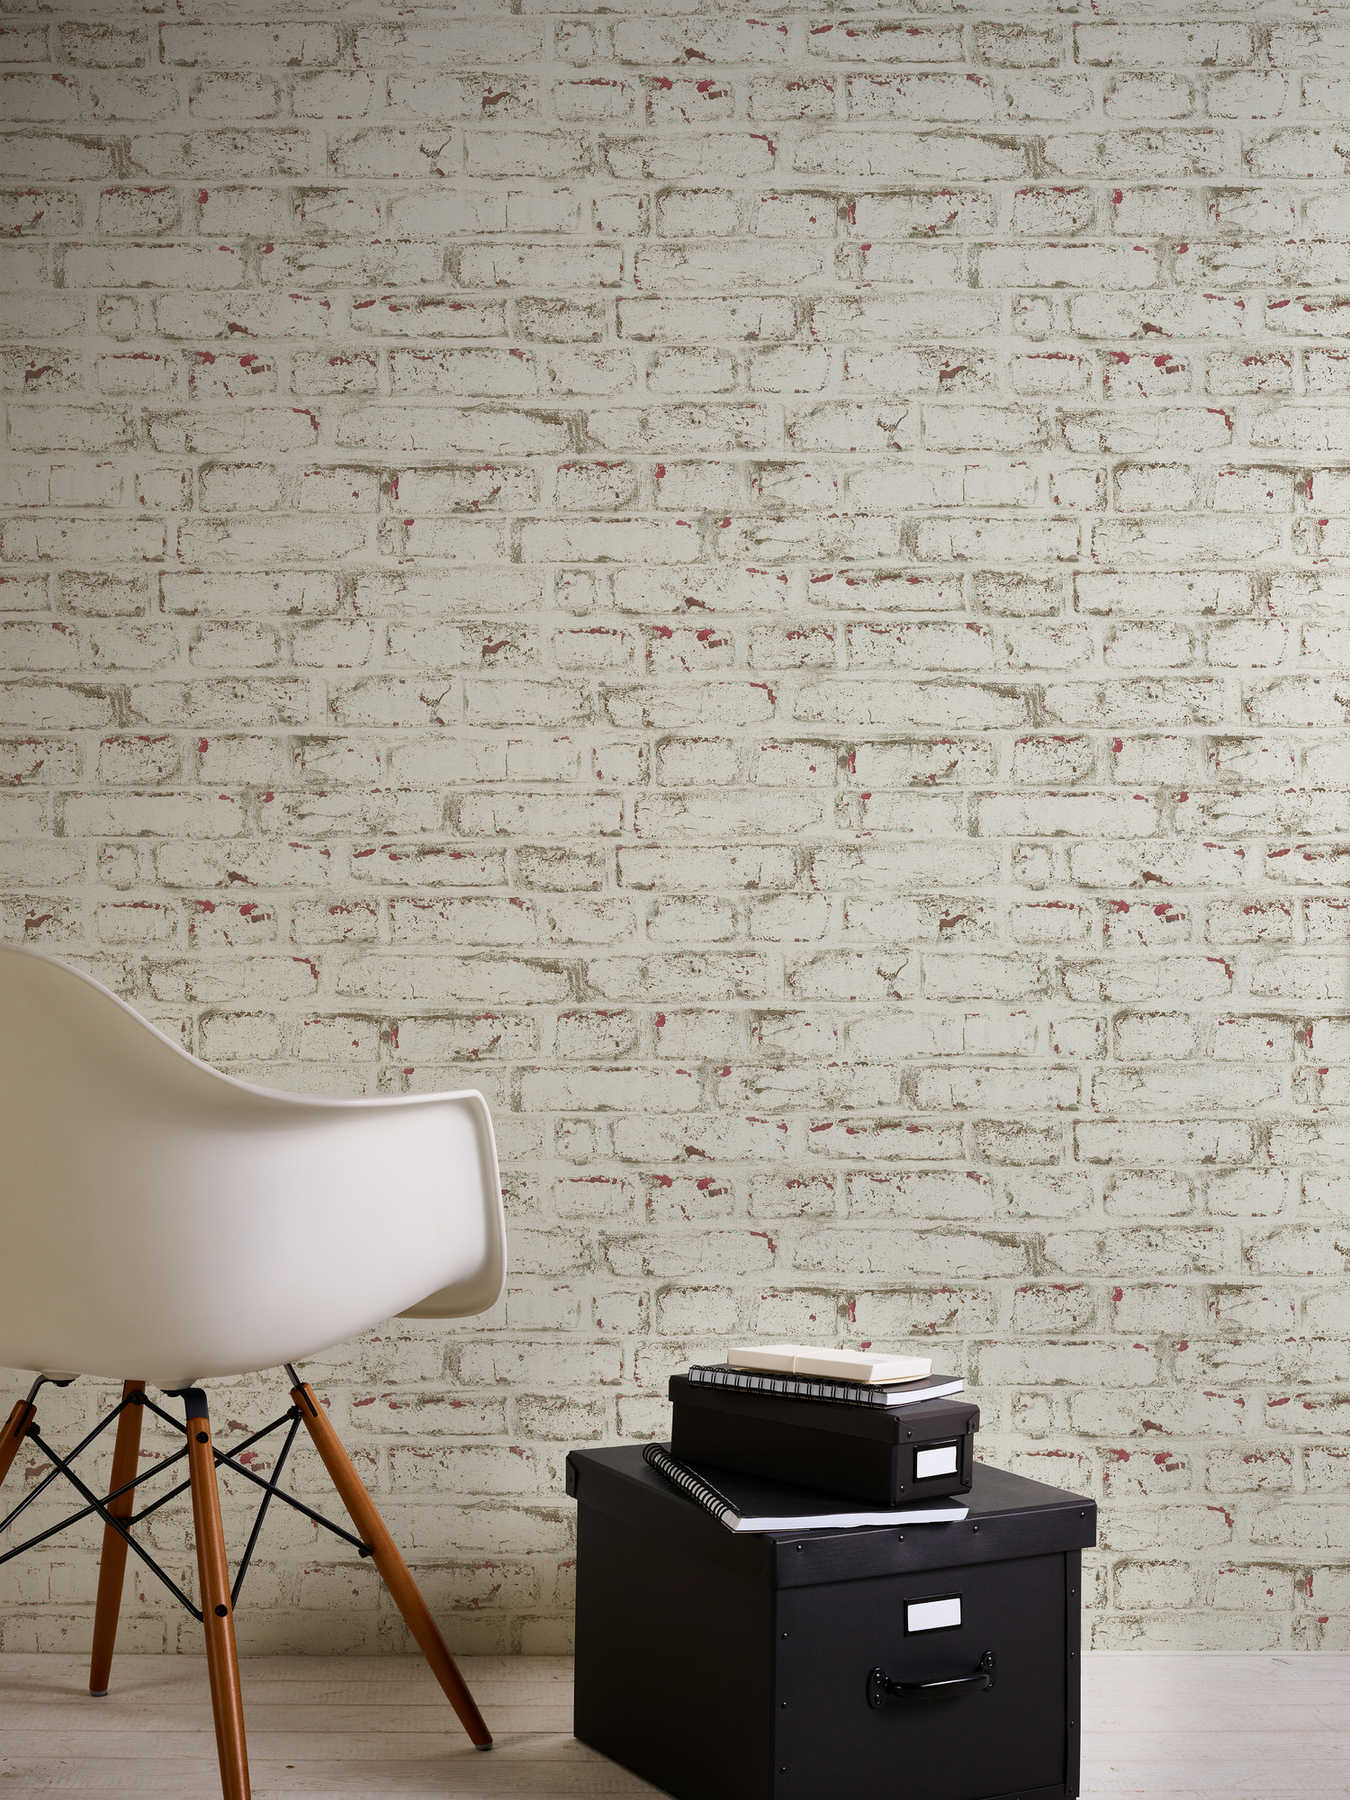             Stone look wallpaper with white brick in vintage look - white, red, beige
        